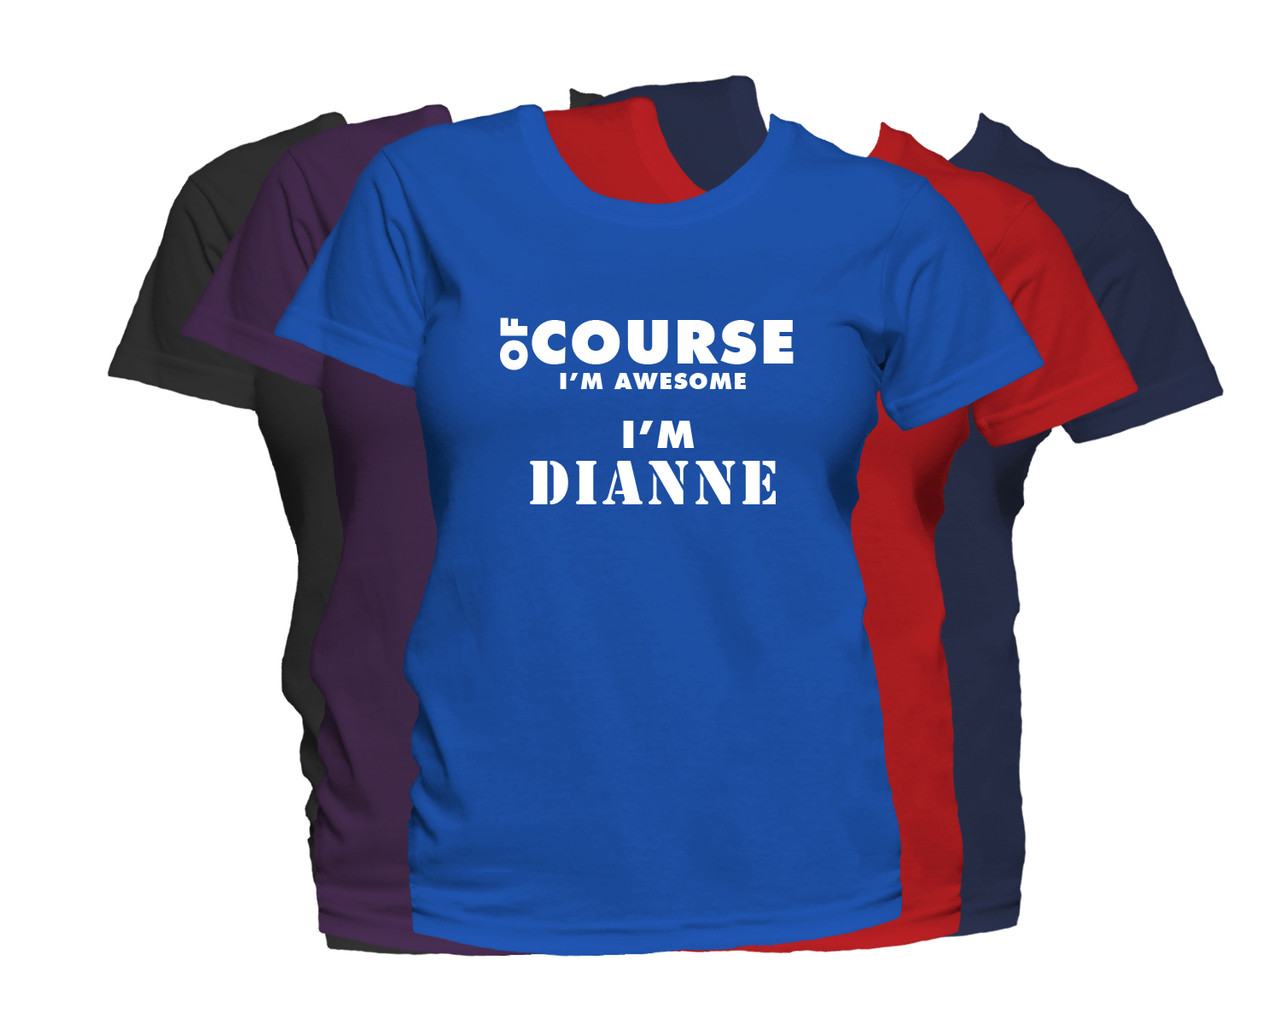 DIANNE First Name T Shirt Of Course I'm Awesome Personalized Custom ...